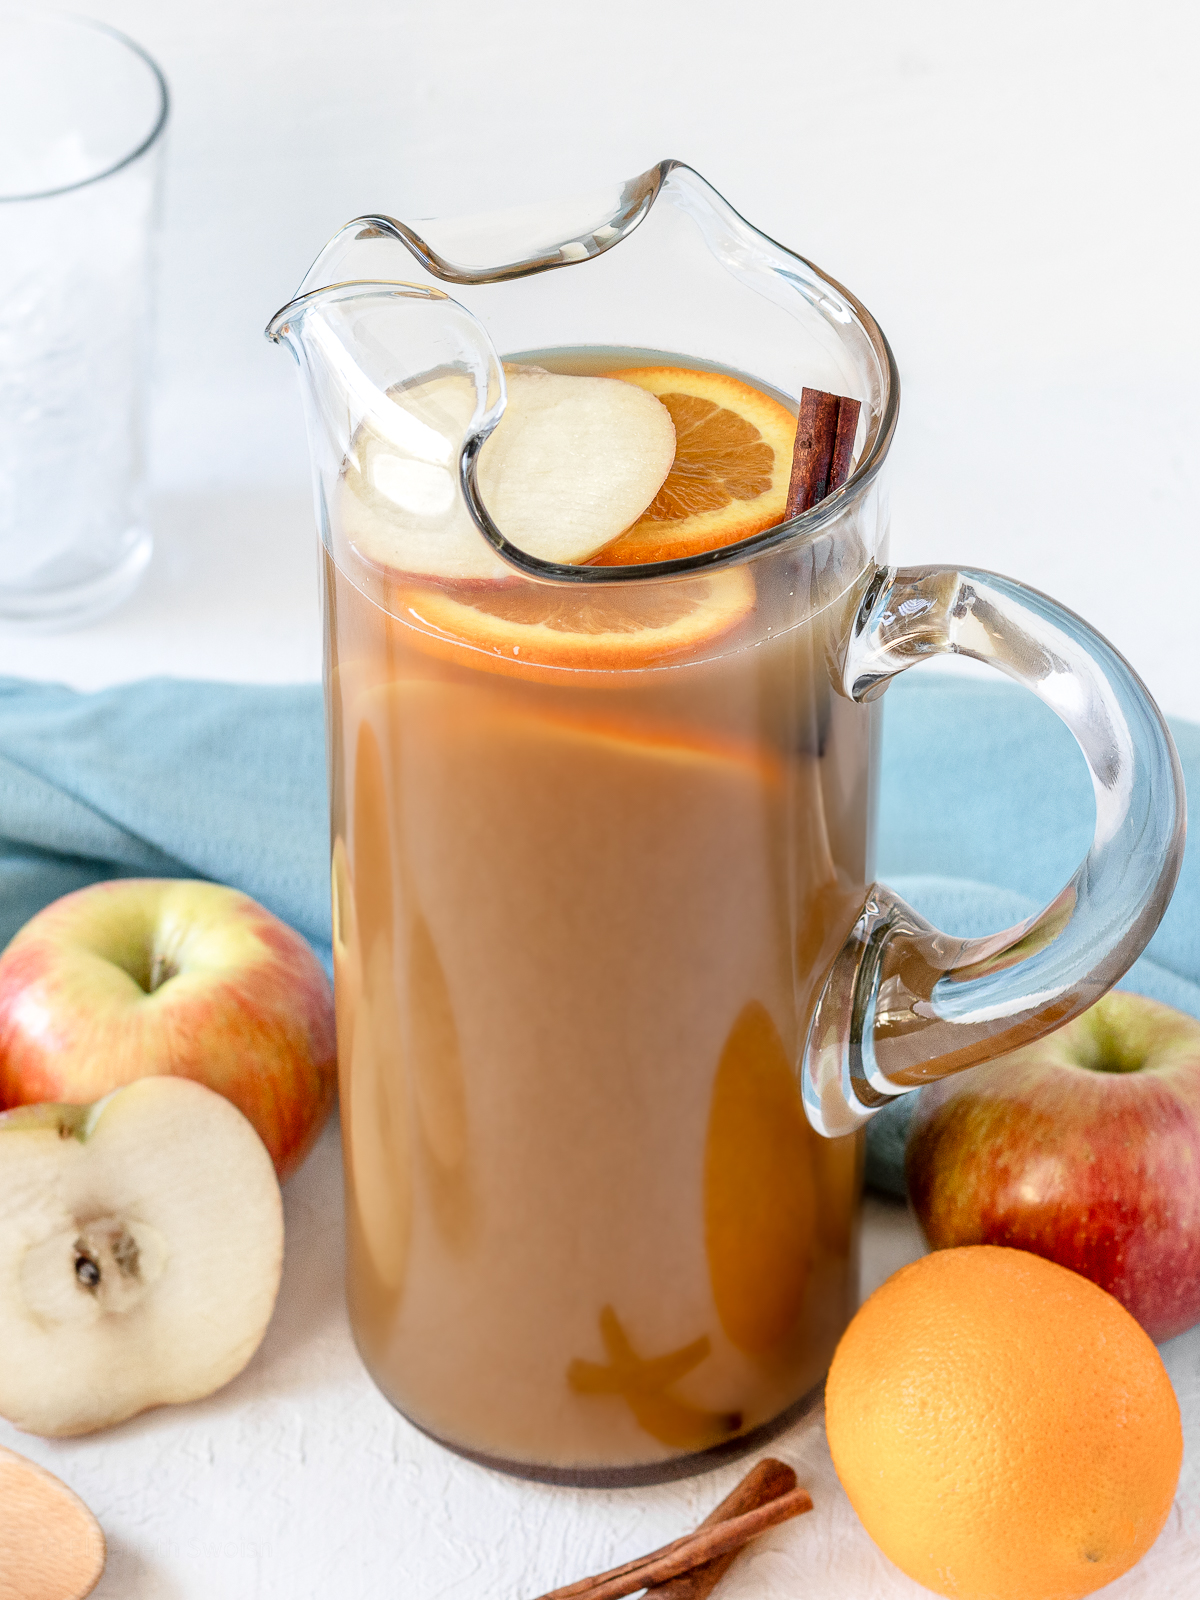 Large pitcher of non alcoholic Sweet Tea Harvest Punch surrounded by apples, oranges, cinnamon sticks, and glasses filled with ice.